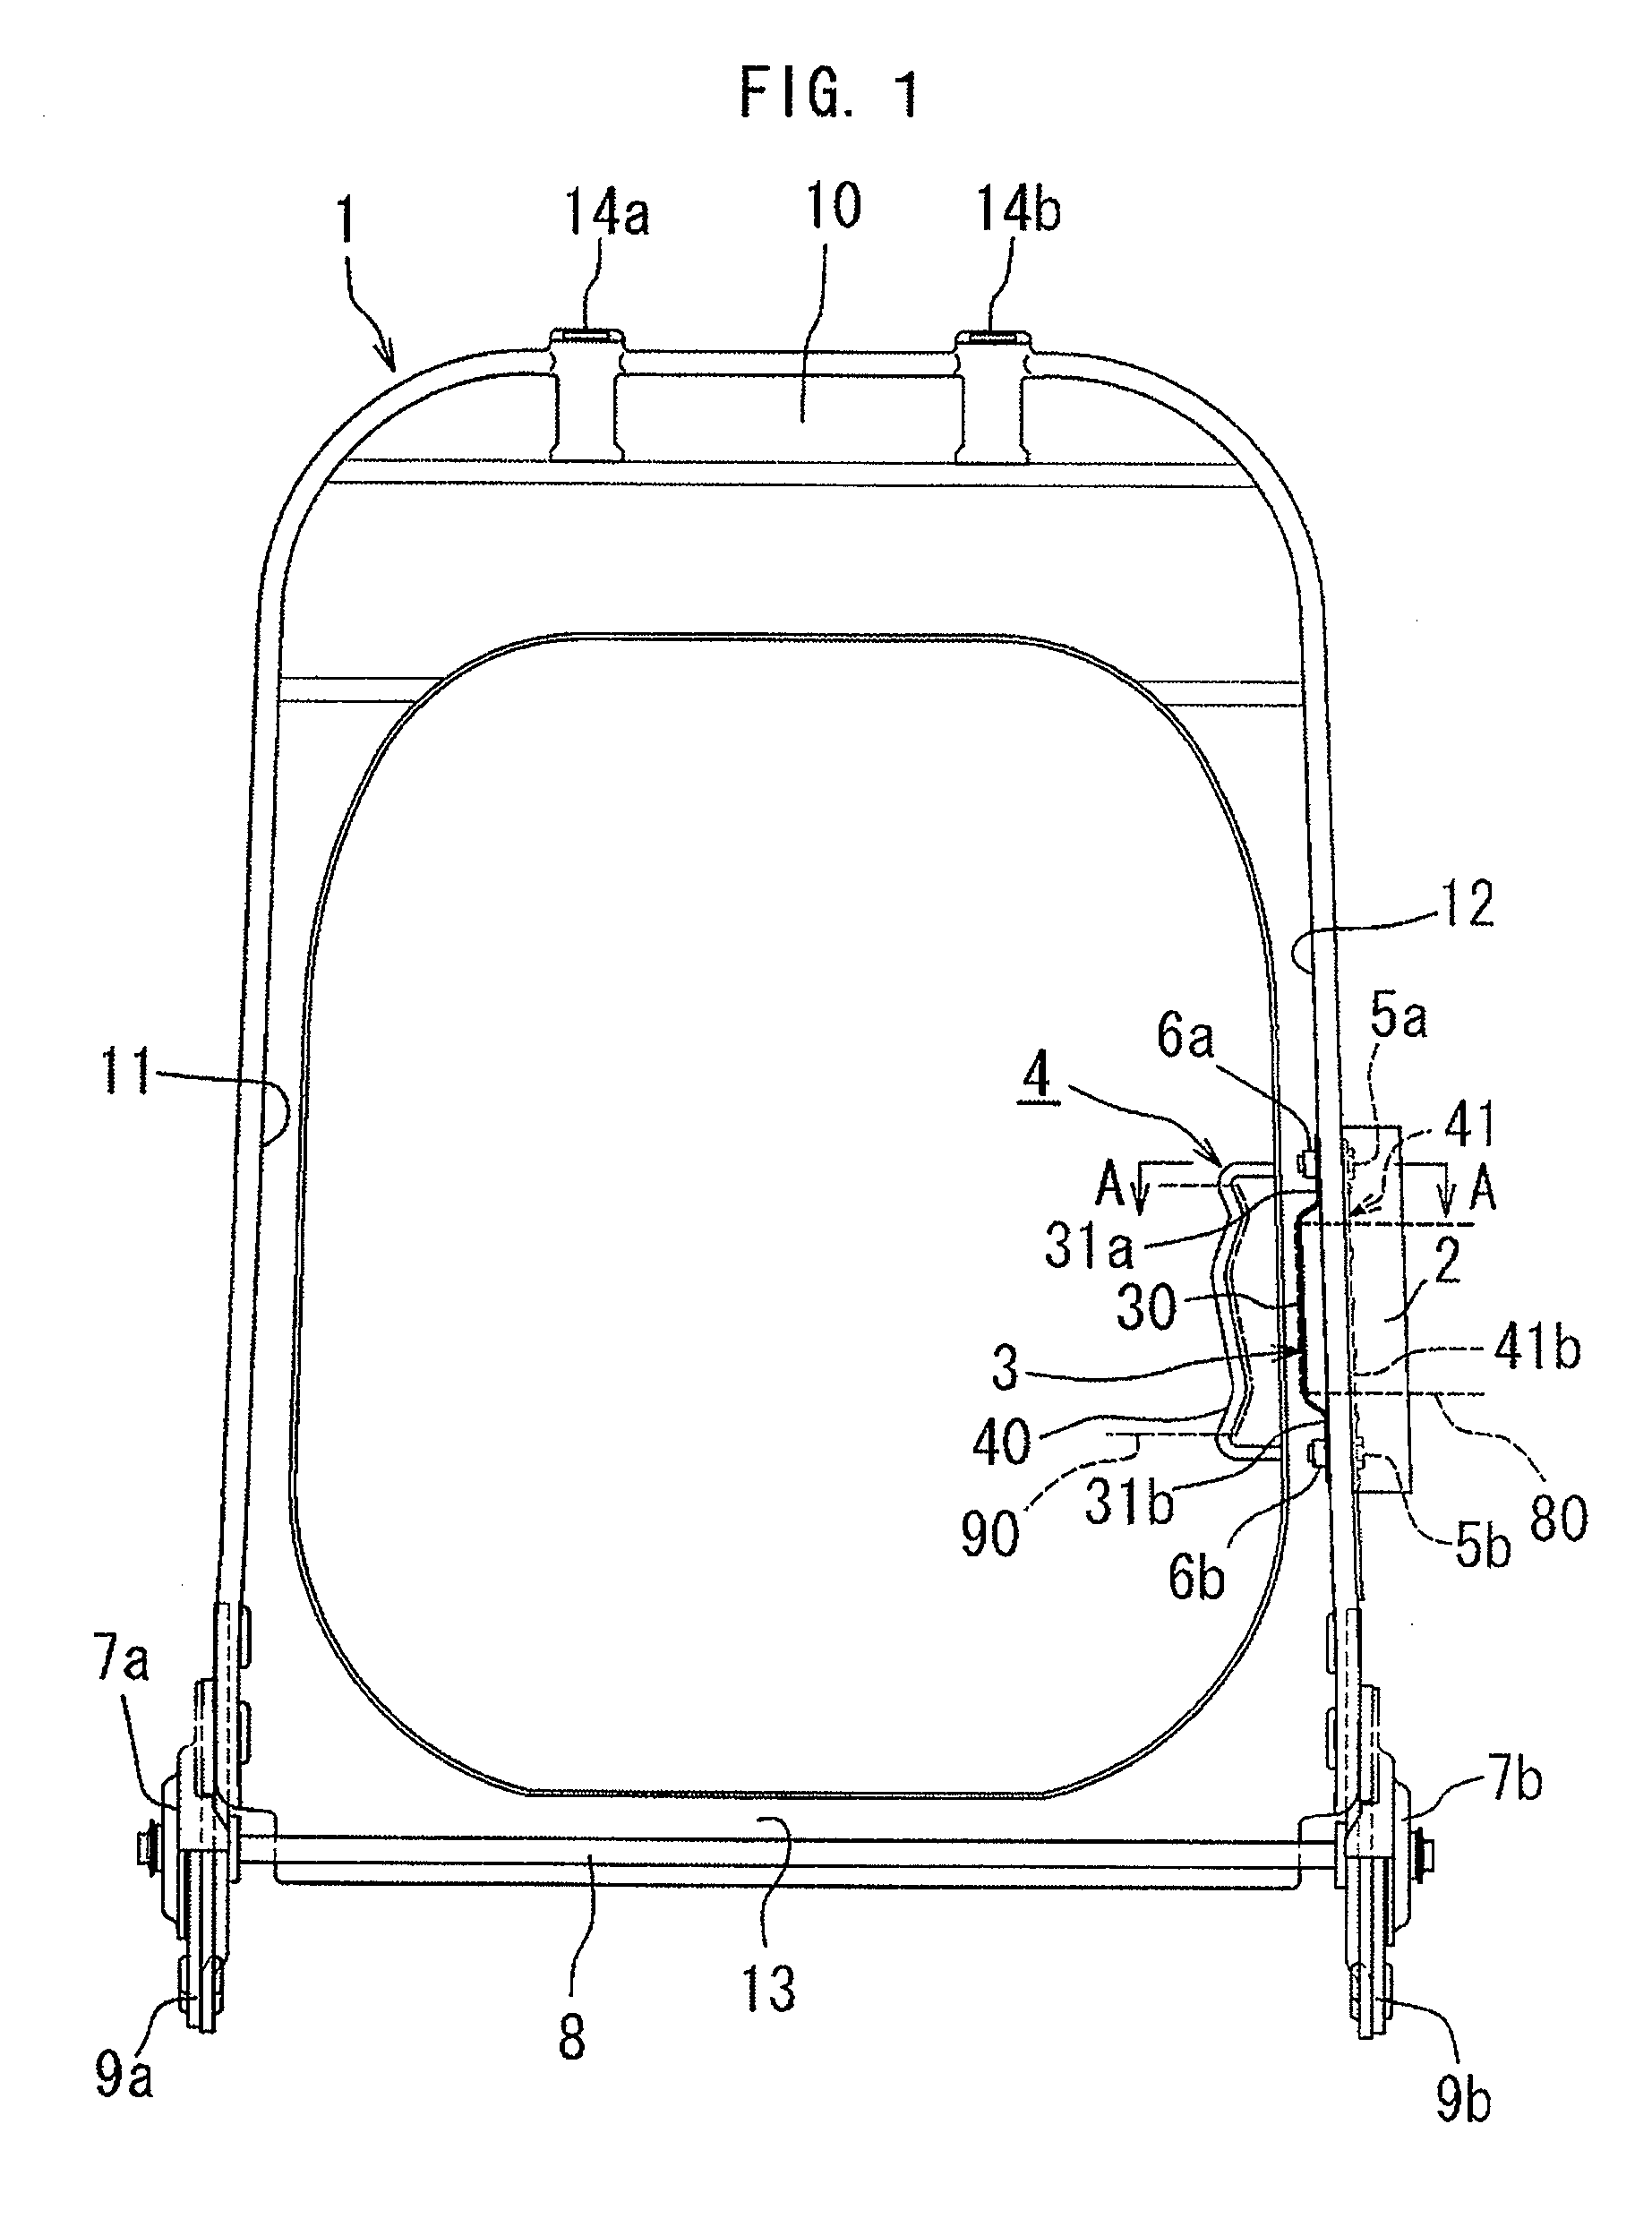 Vehicle seat having light alloy frame provided with airbag module